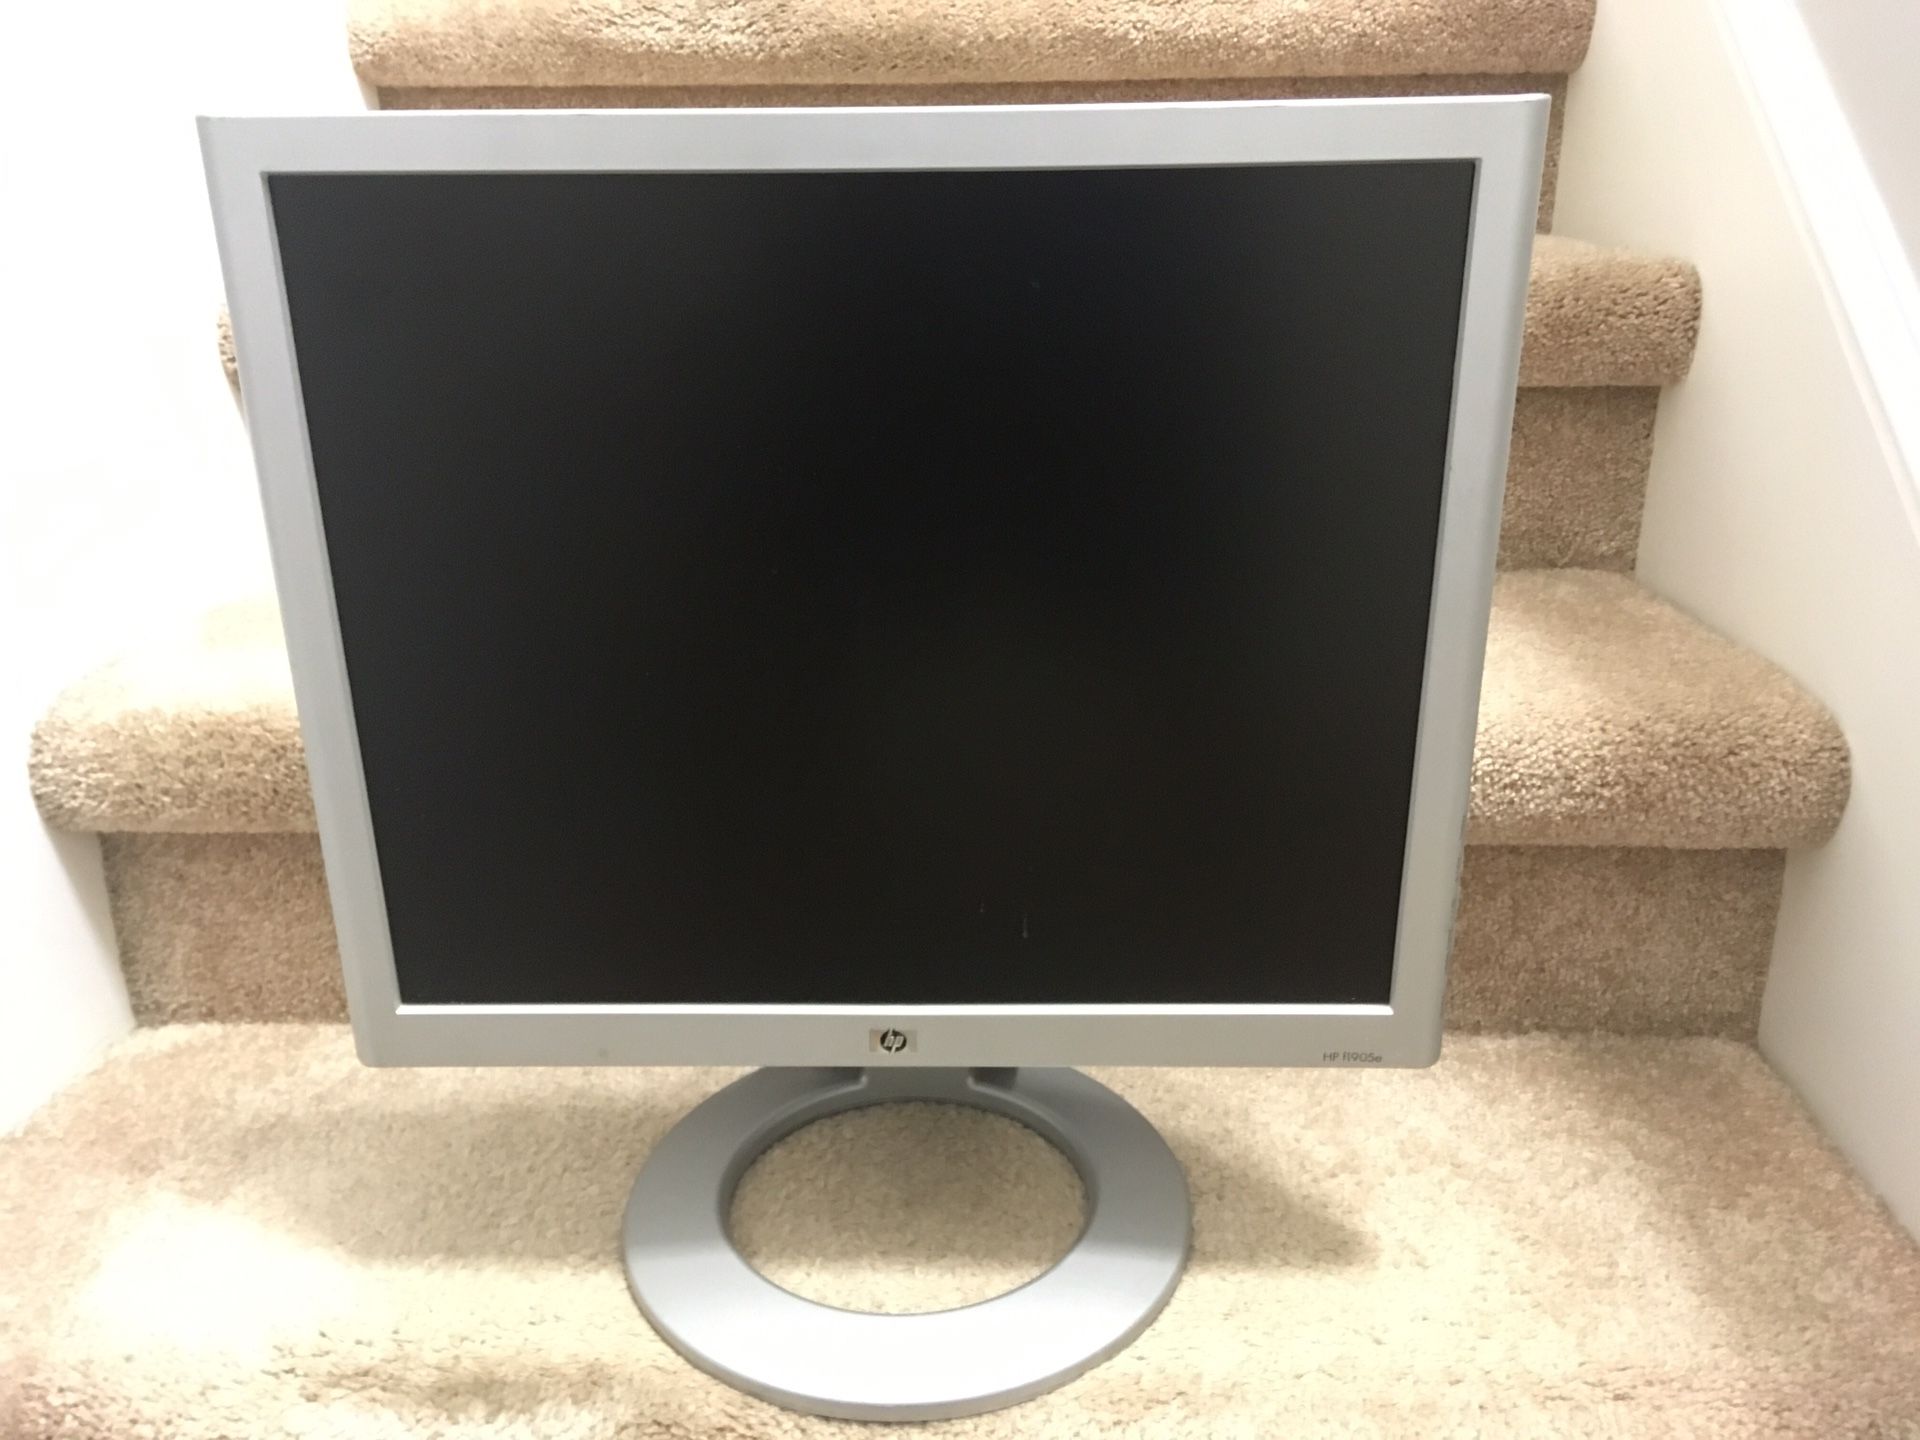 19” HP LCD flat screen monitor, great condition